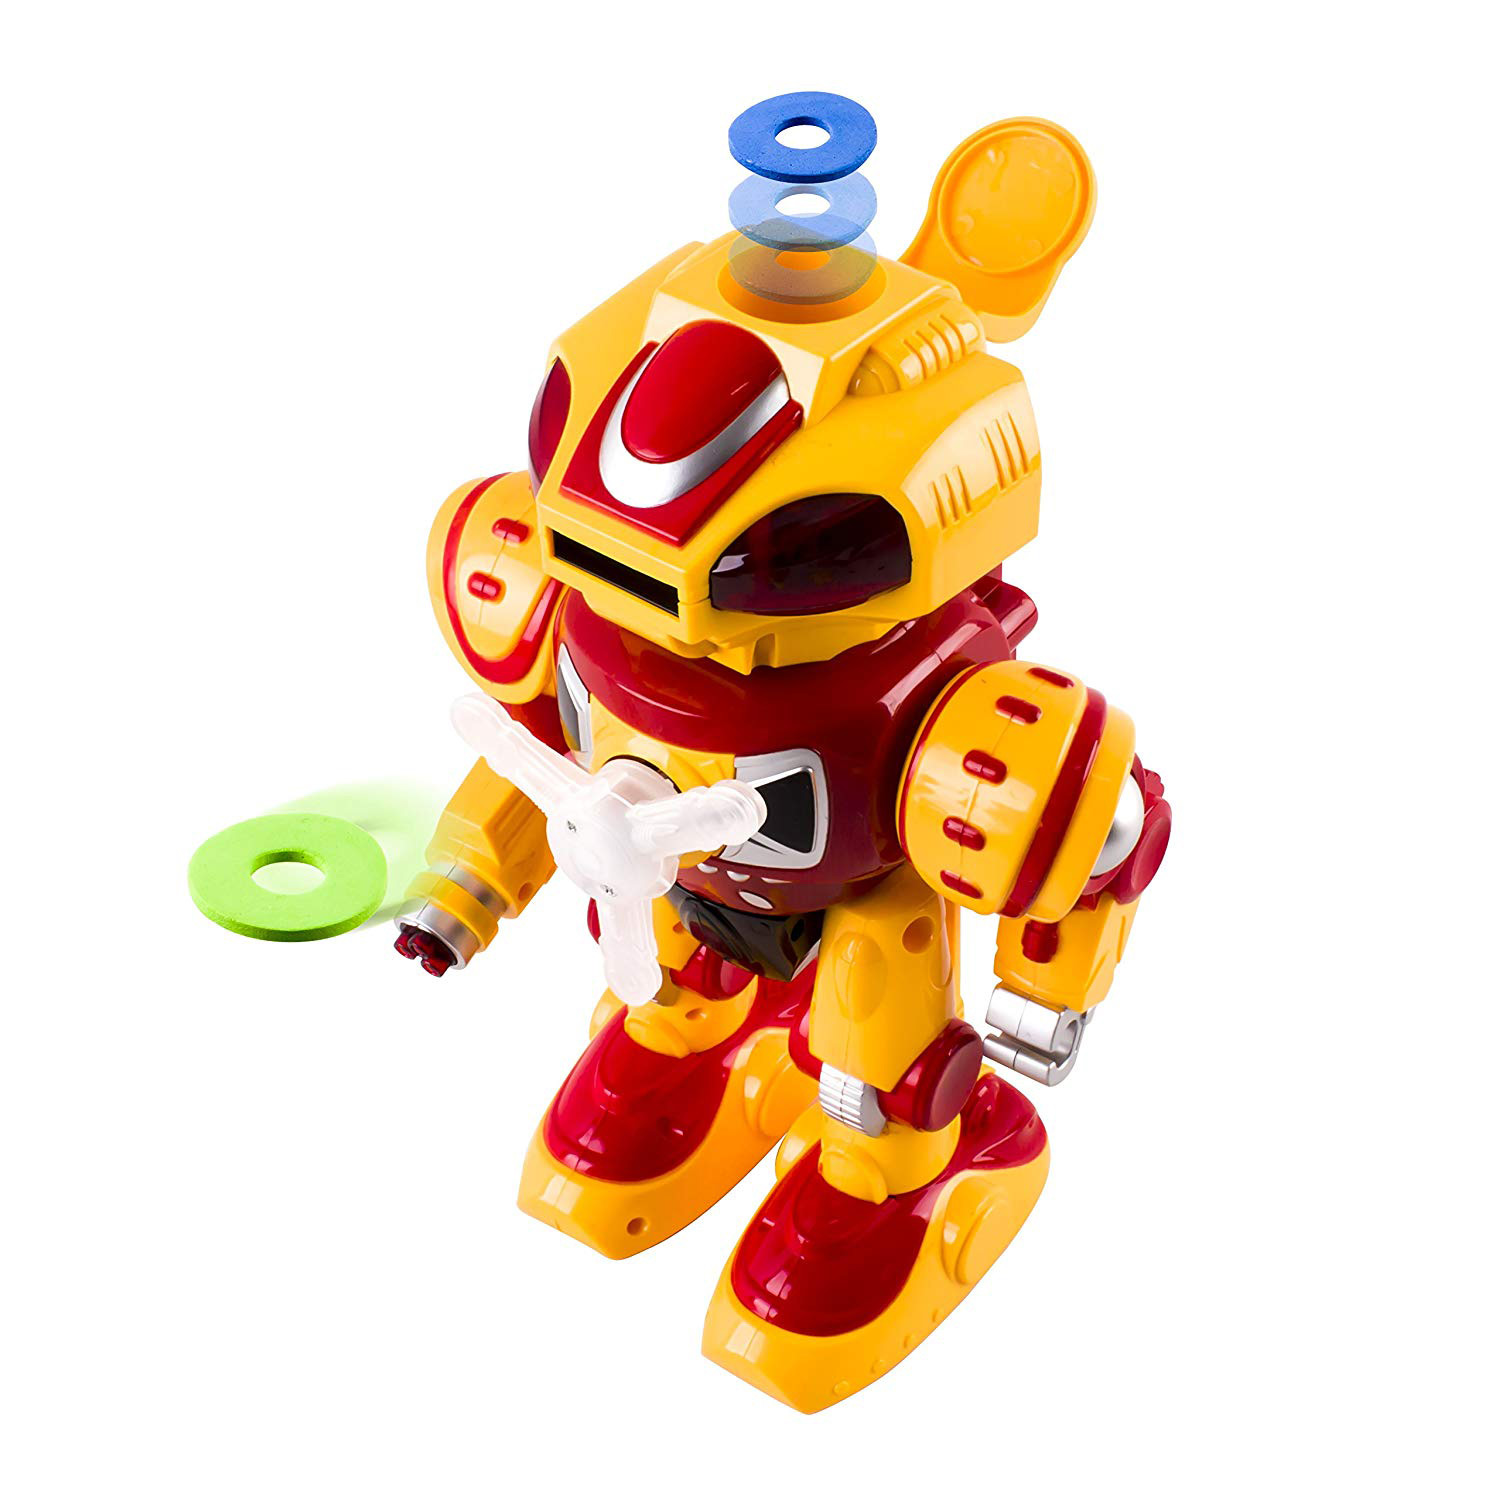 Super Android Toy Robot With Disc Shooting Walking Flashing Lights And Sound Features Great Action Toy For Kids Boys Girls Toddlers Battery Operated Yellow